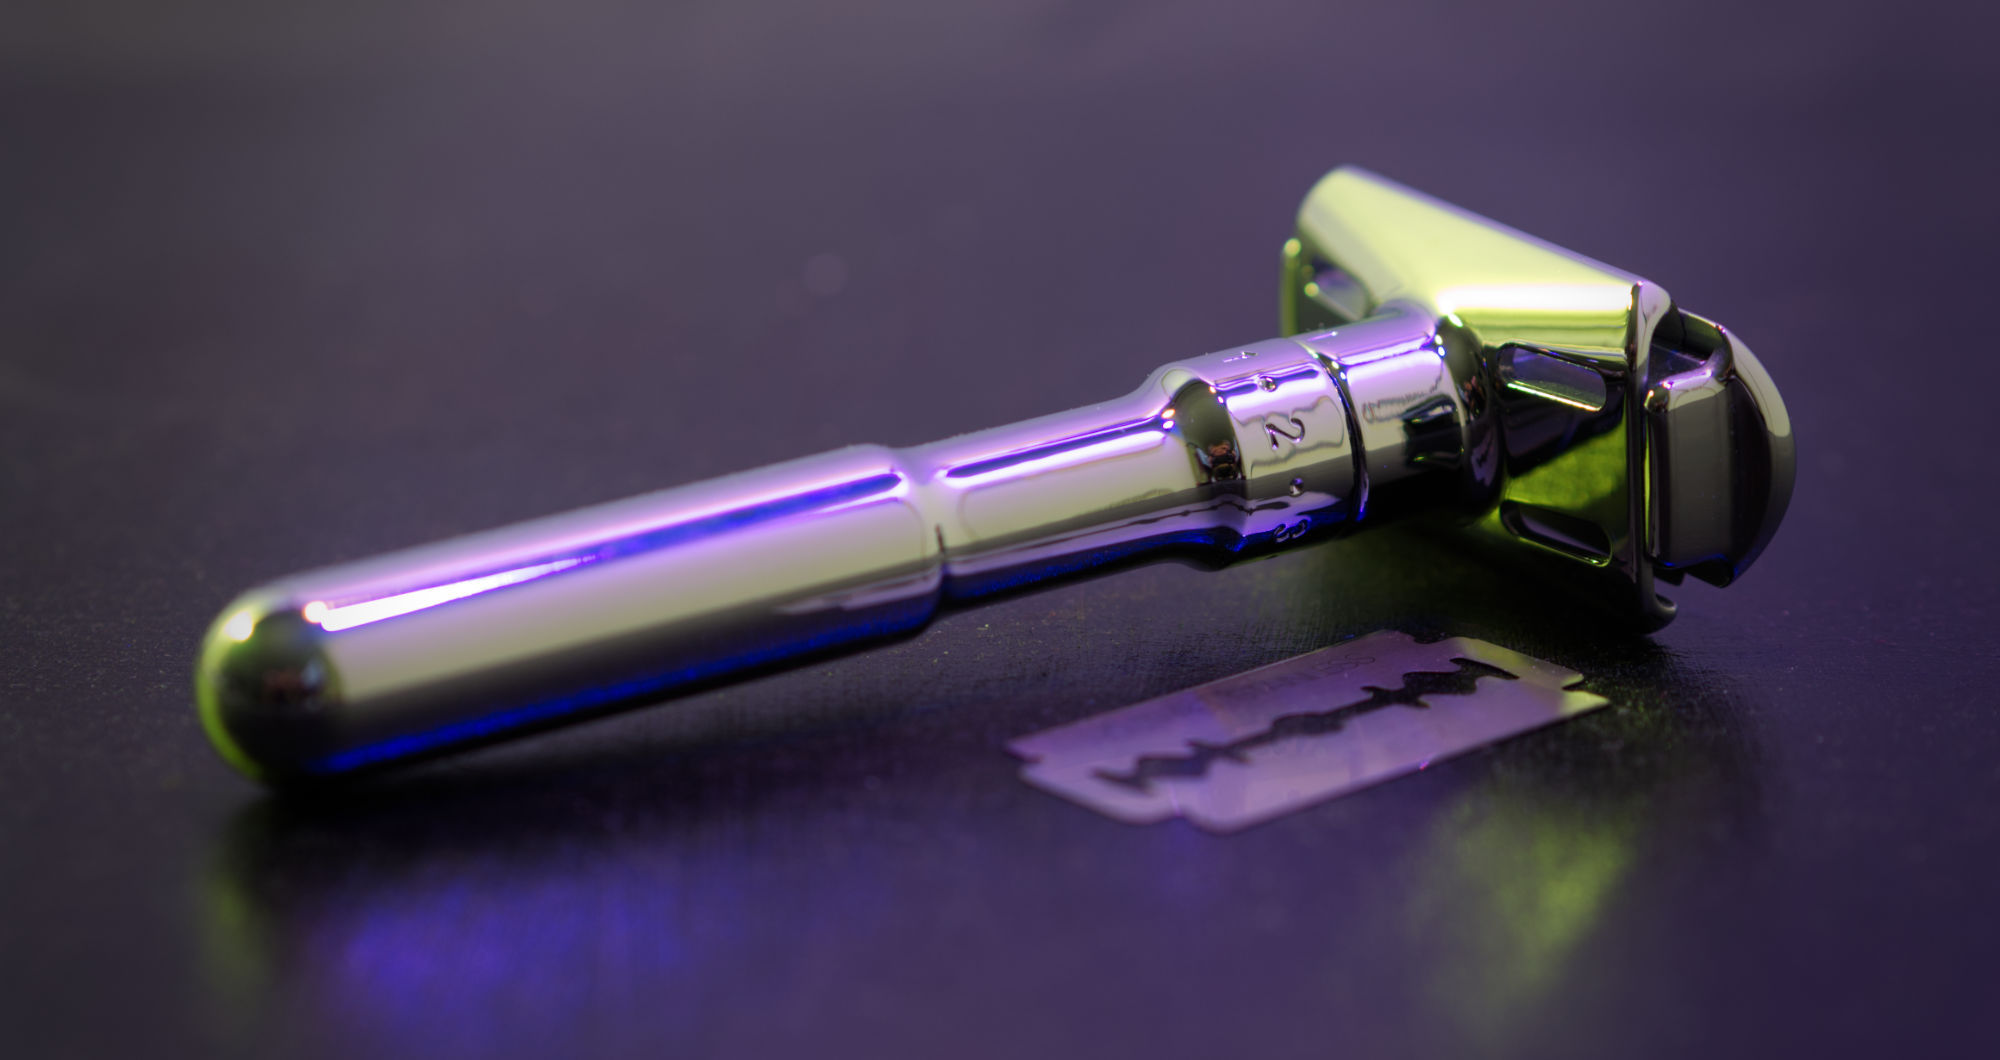 Photo of a chrome safety razor and a razor blade in purple-ish lighting, view from the side showing a number scale imprinted on the handle